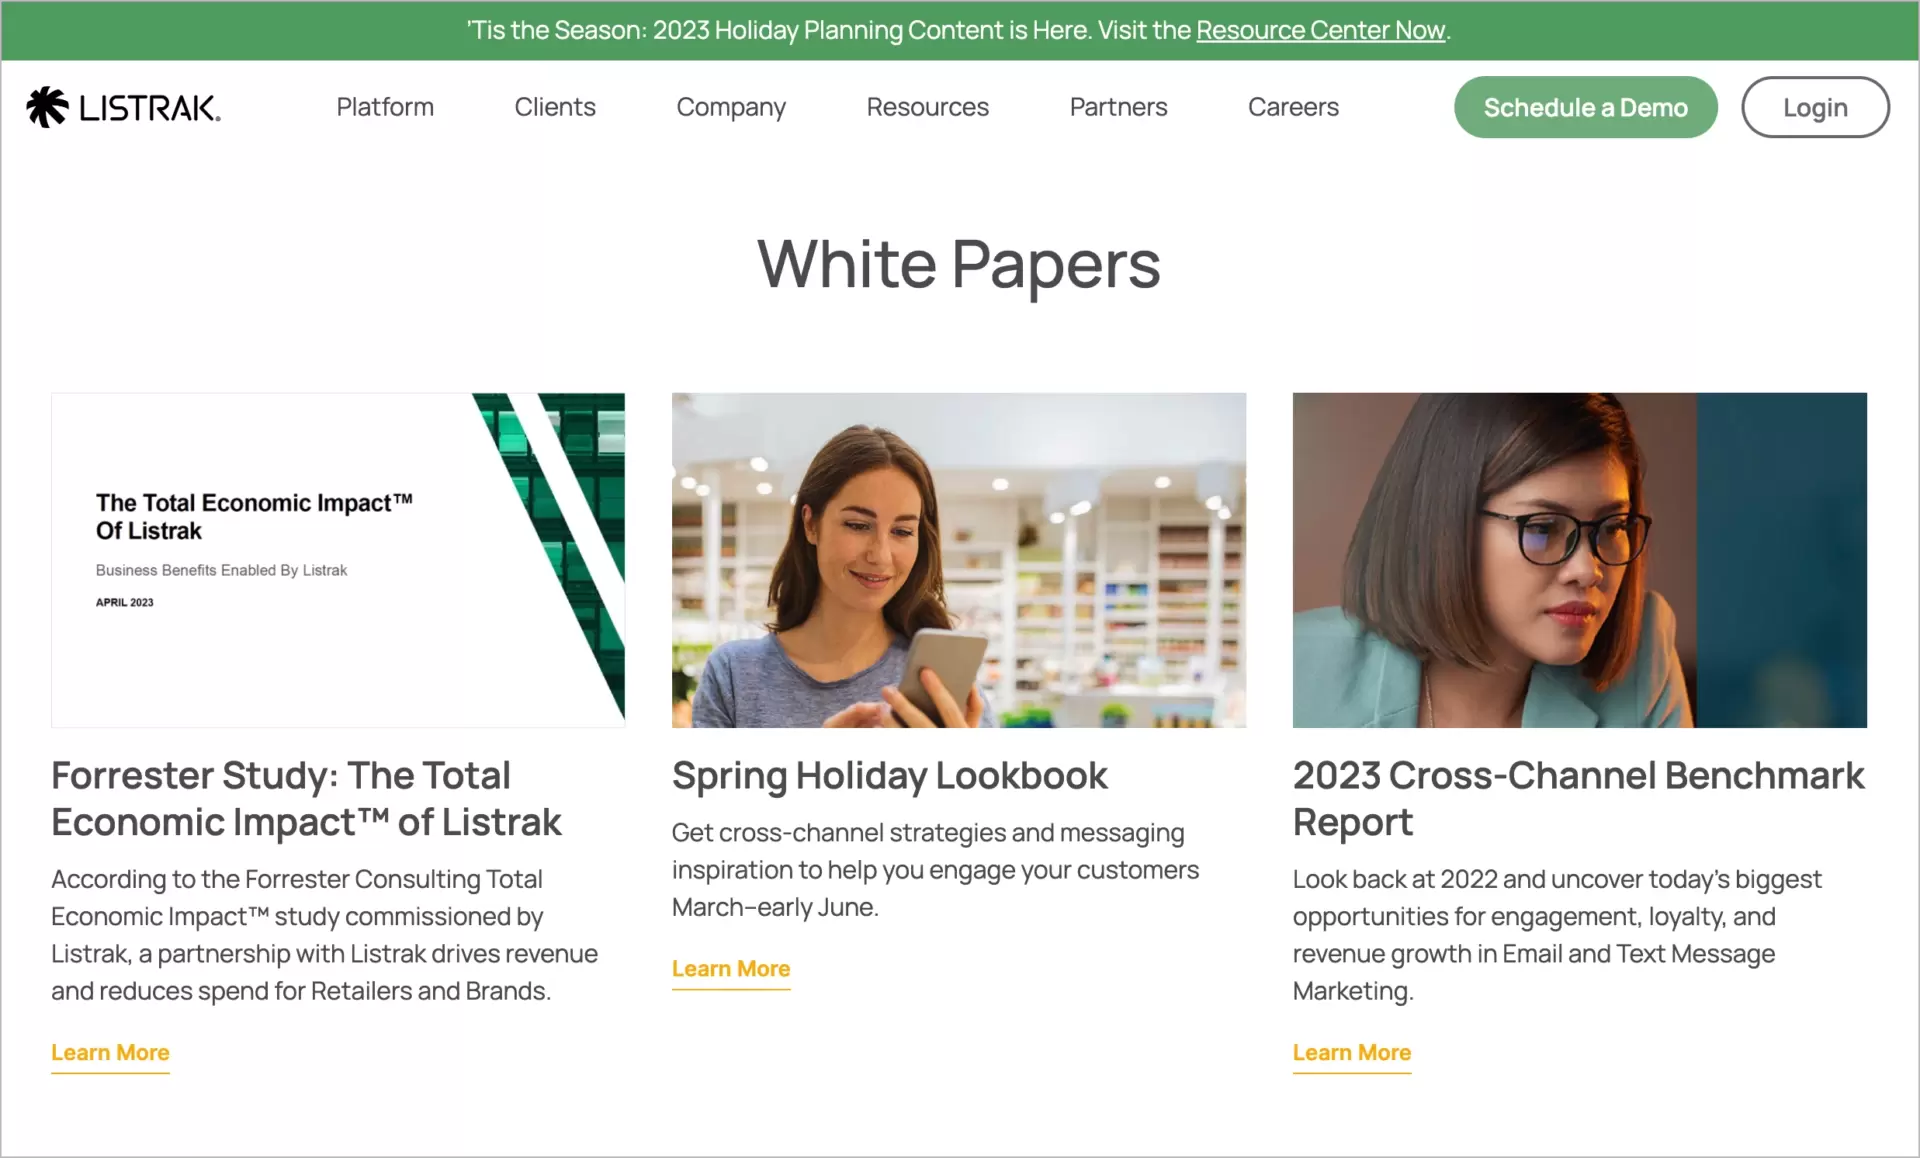 Whitepapers for interested prospects on B2B company site